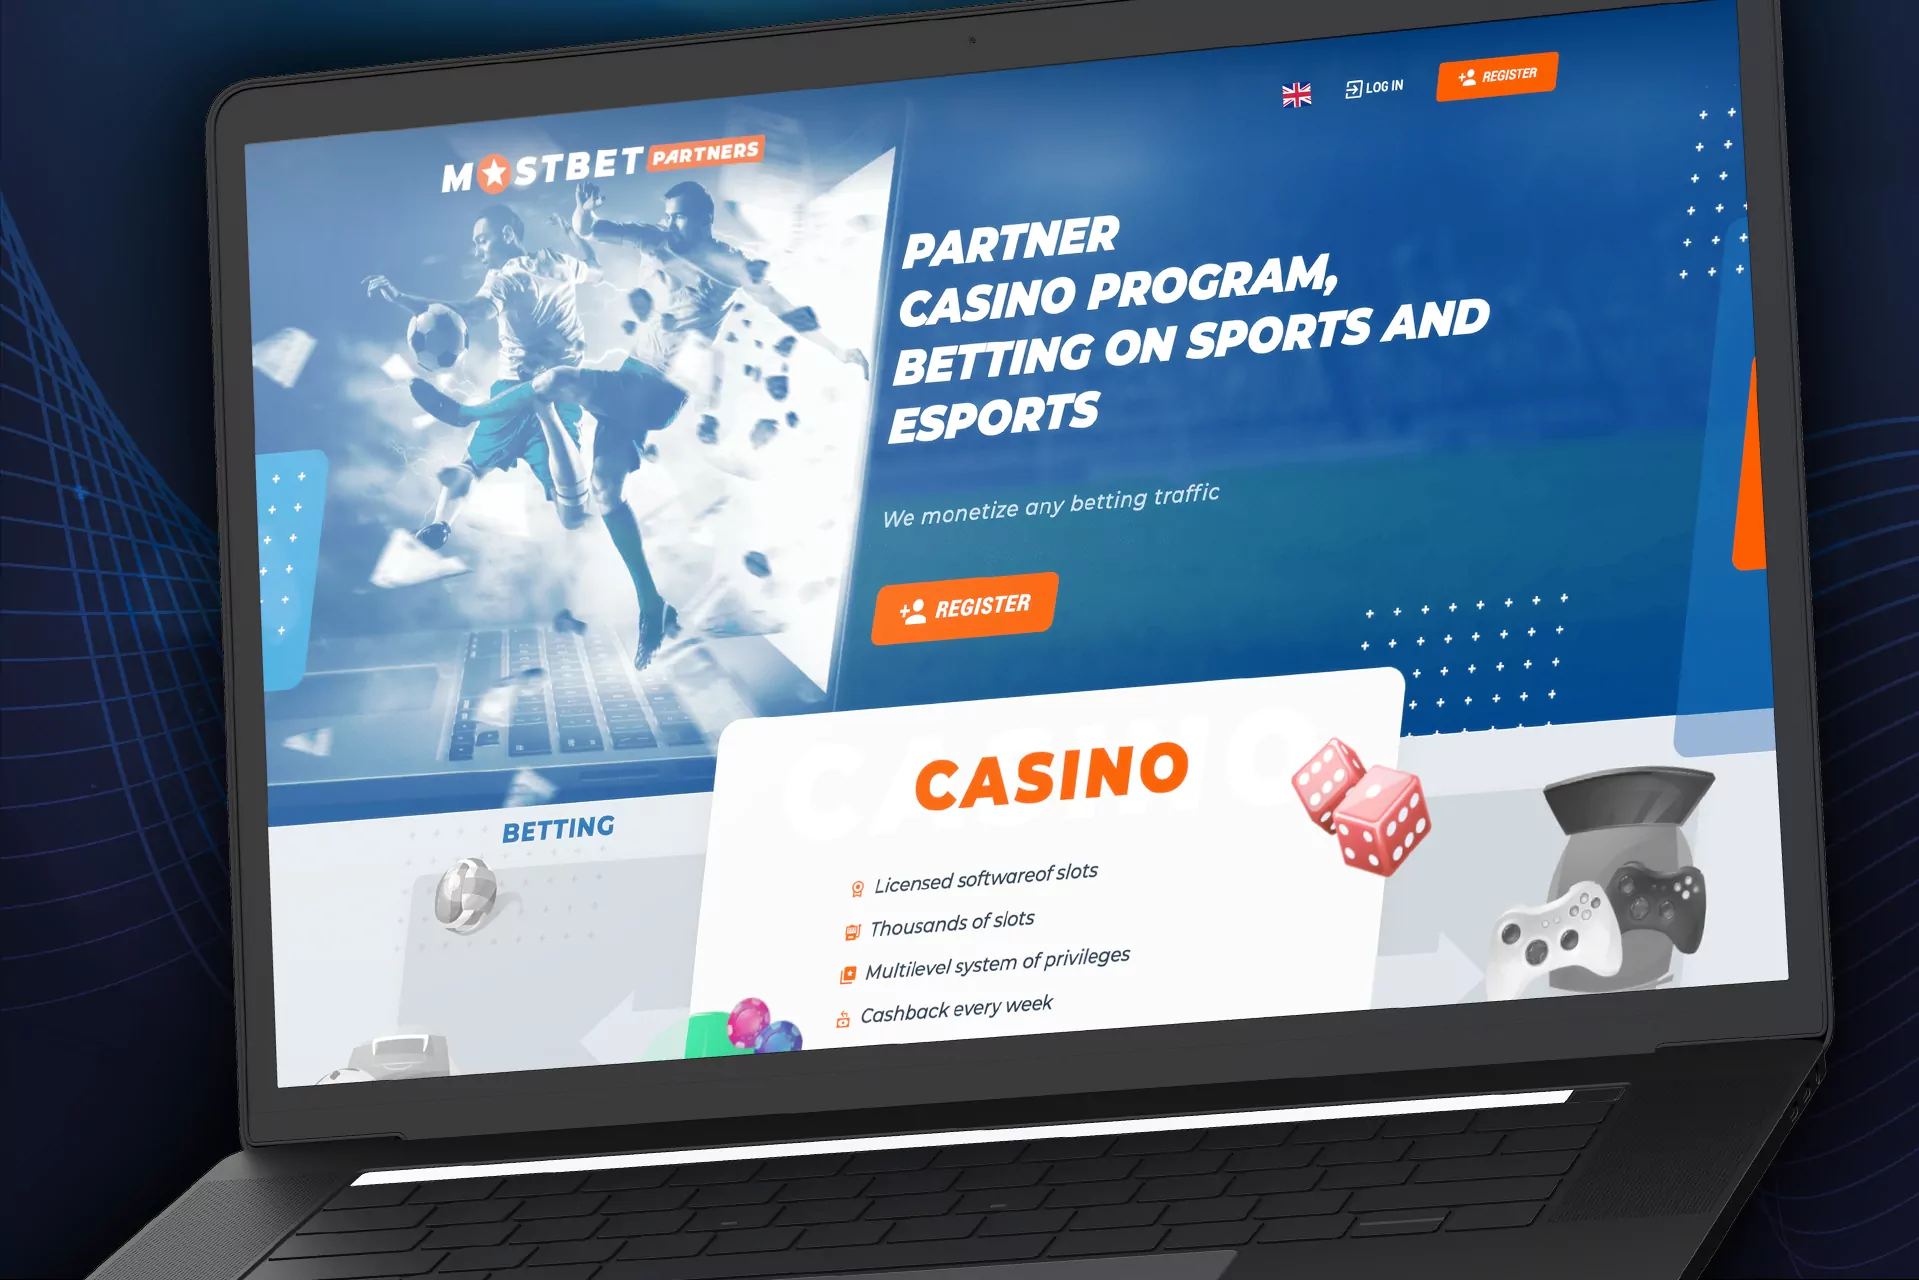 Join the affiliate program and increase your profit from Mostbet.